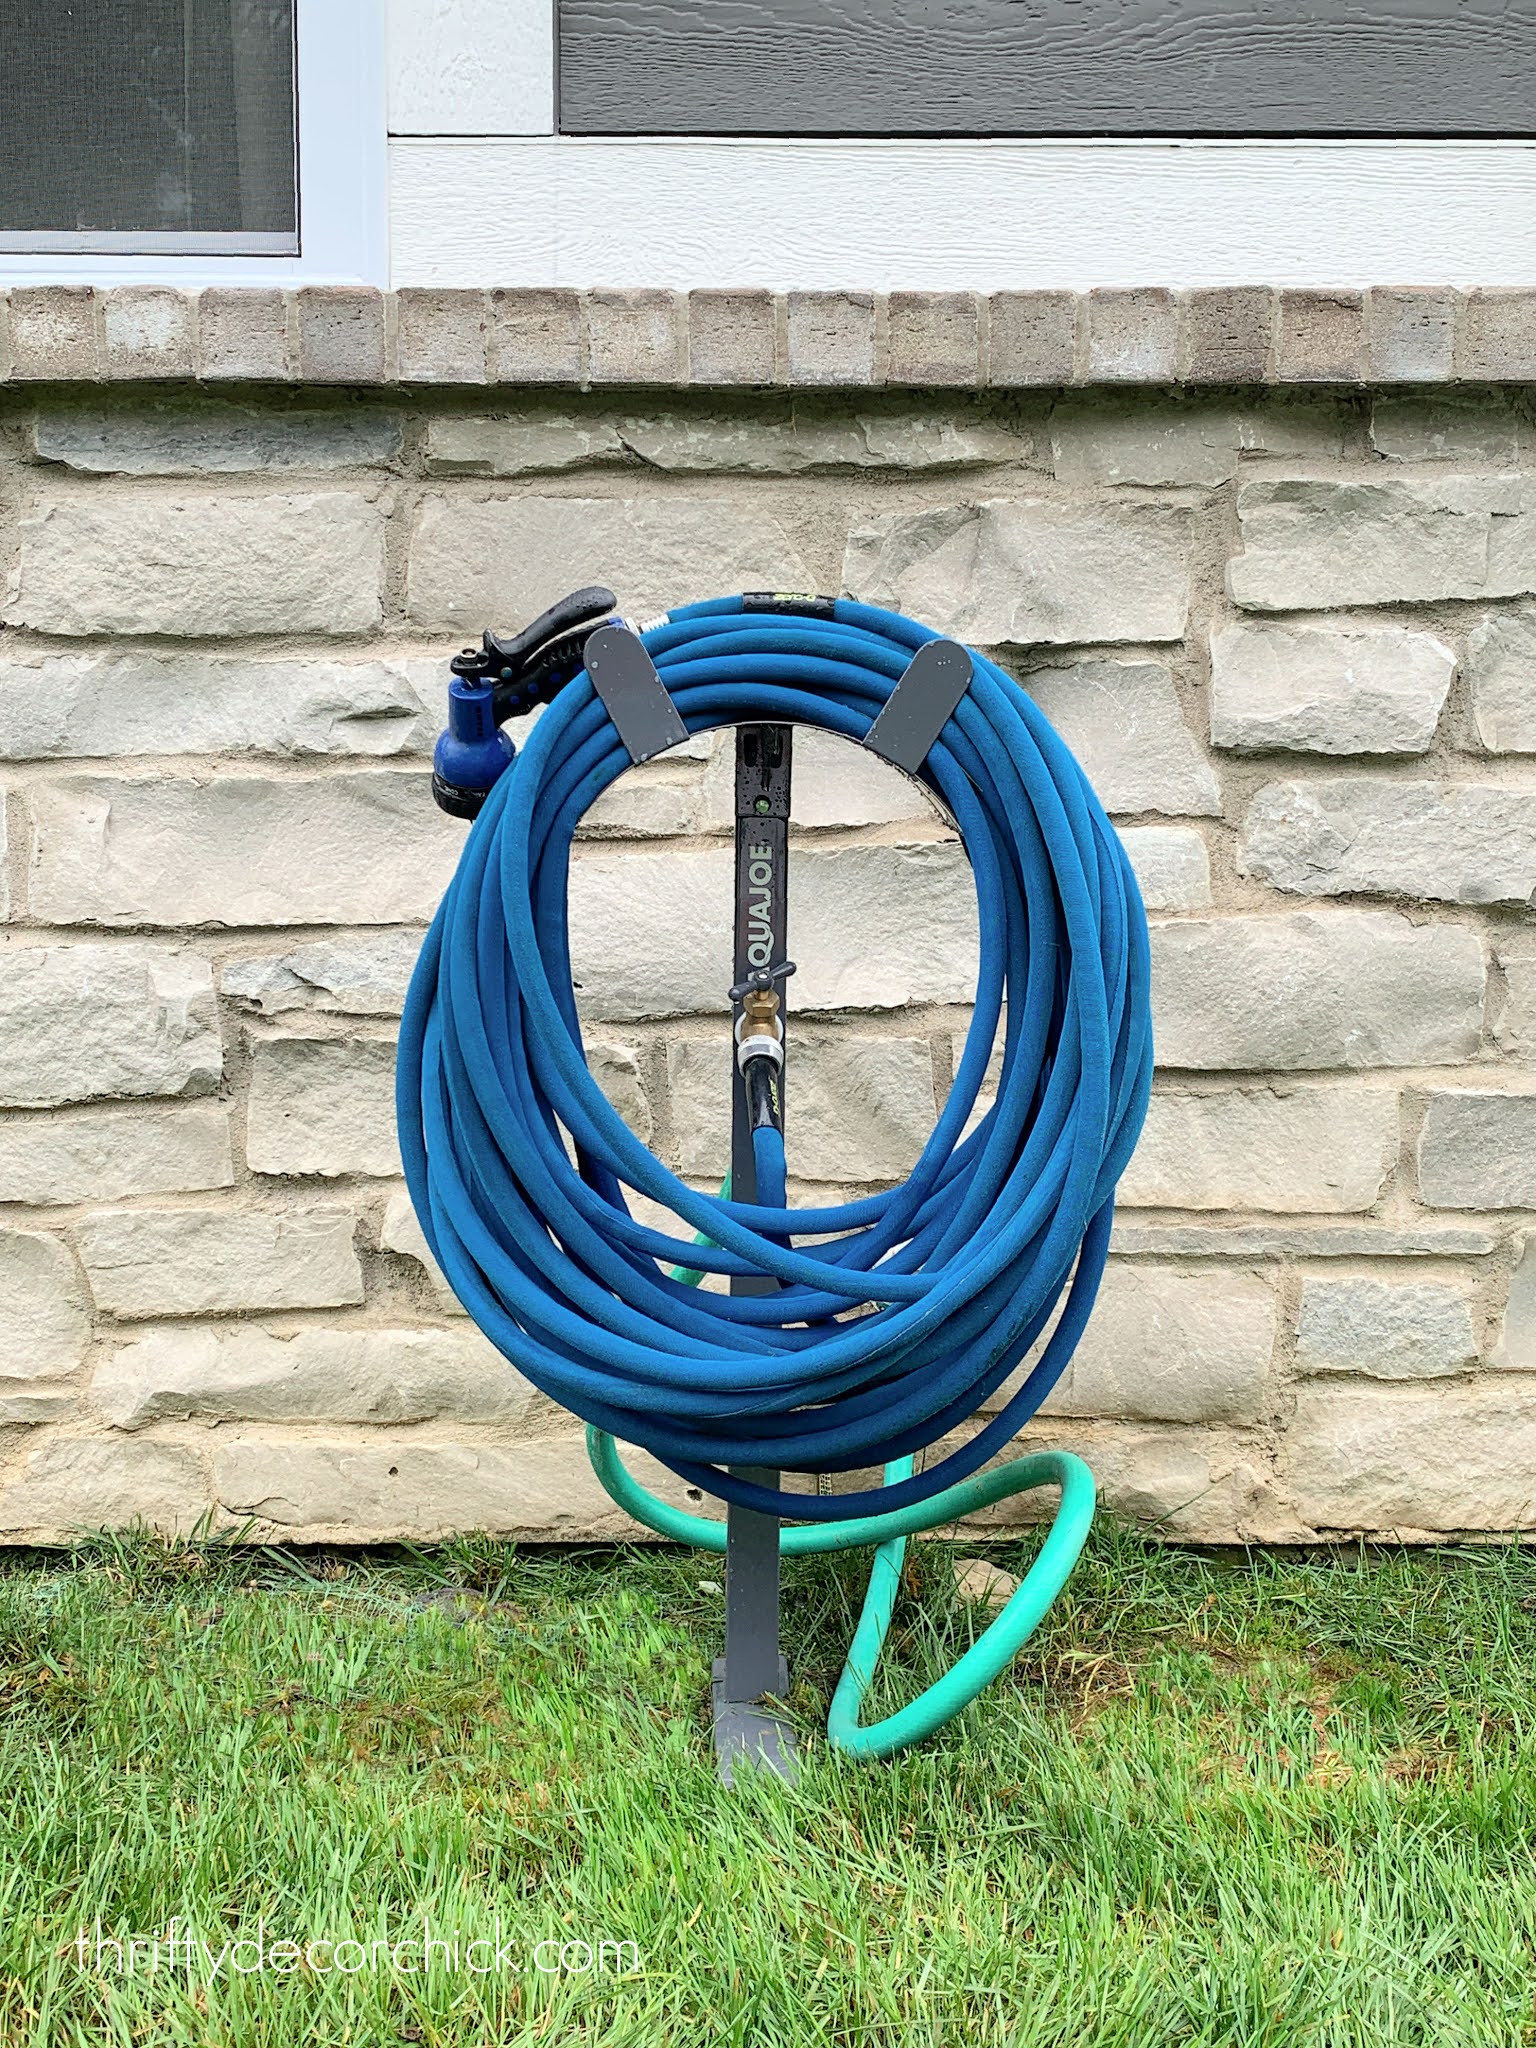 How to Extend an Outdoor Hose Bib Anywhere!